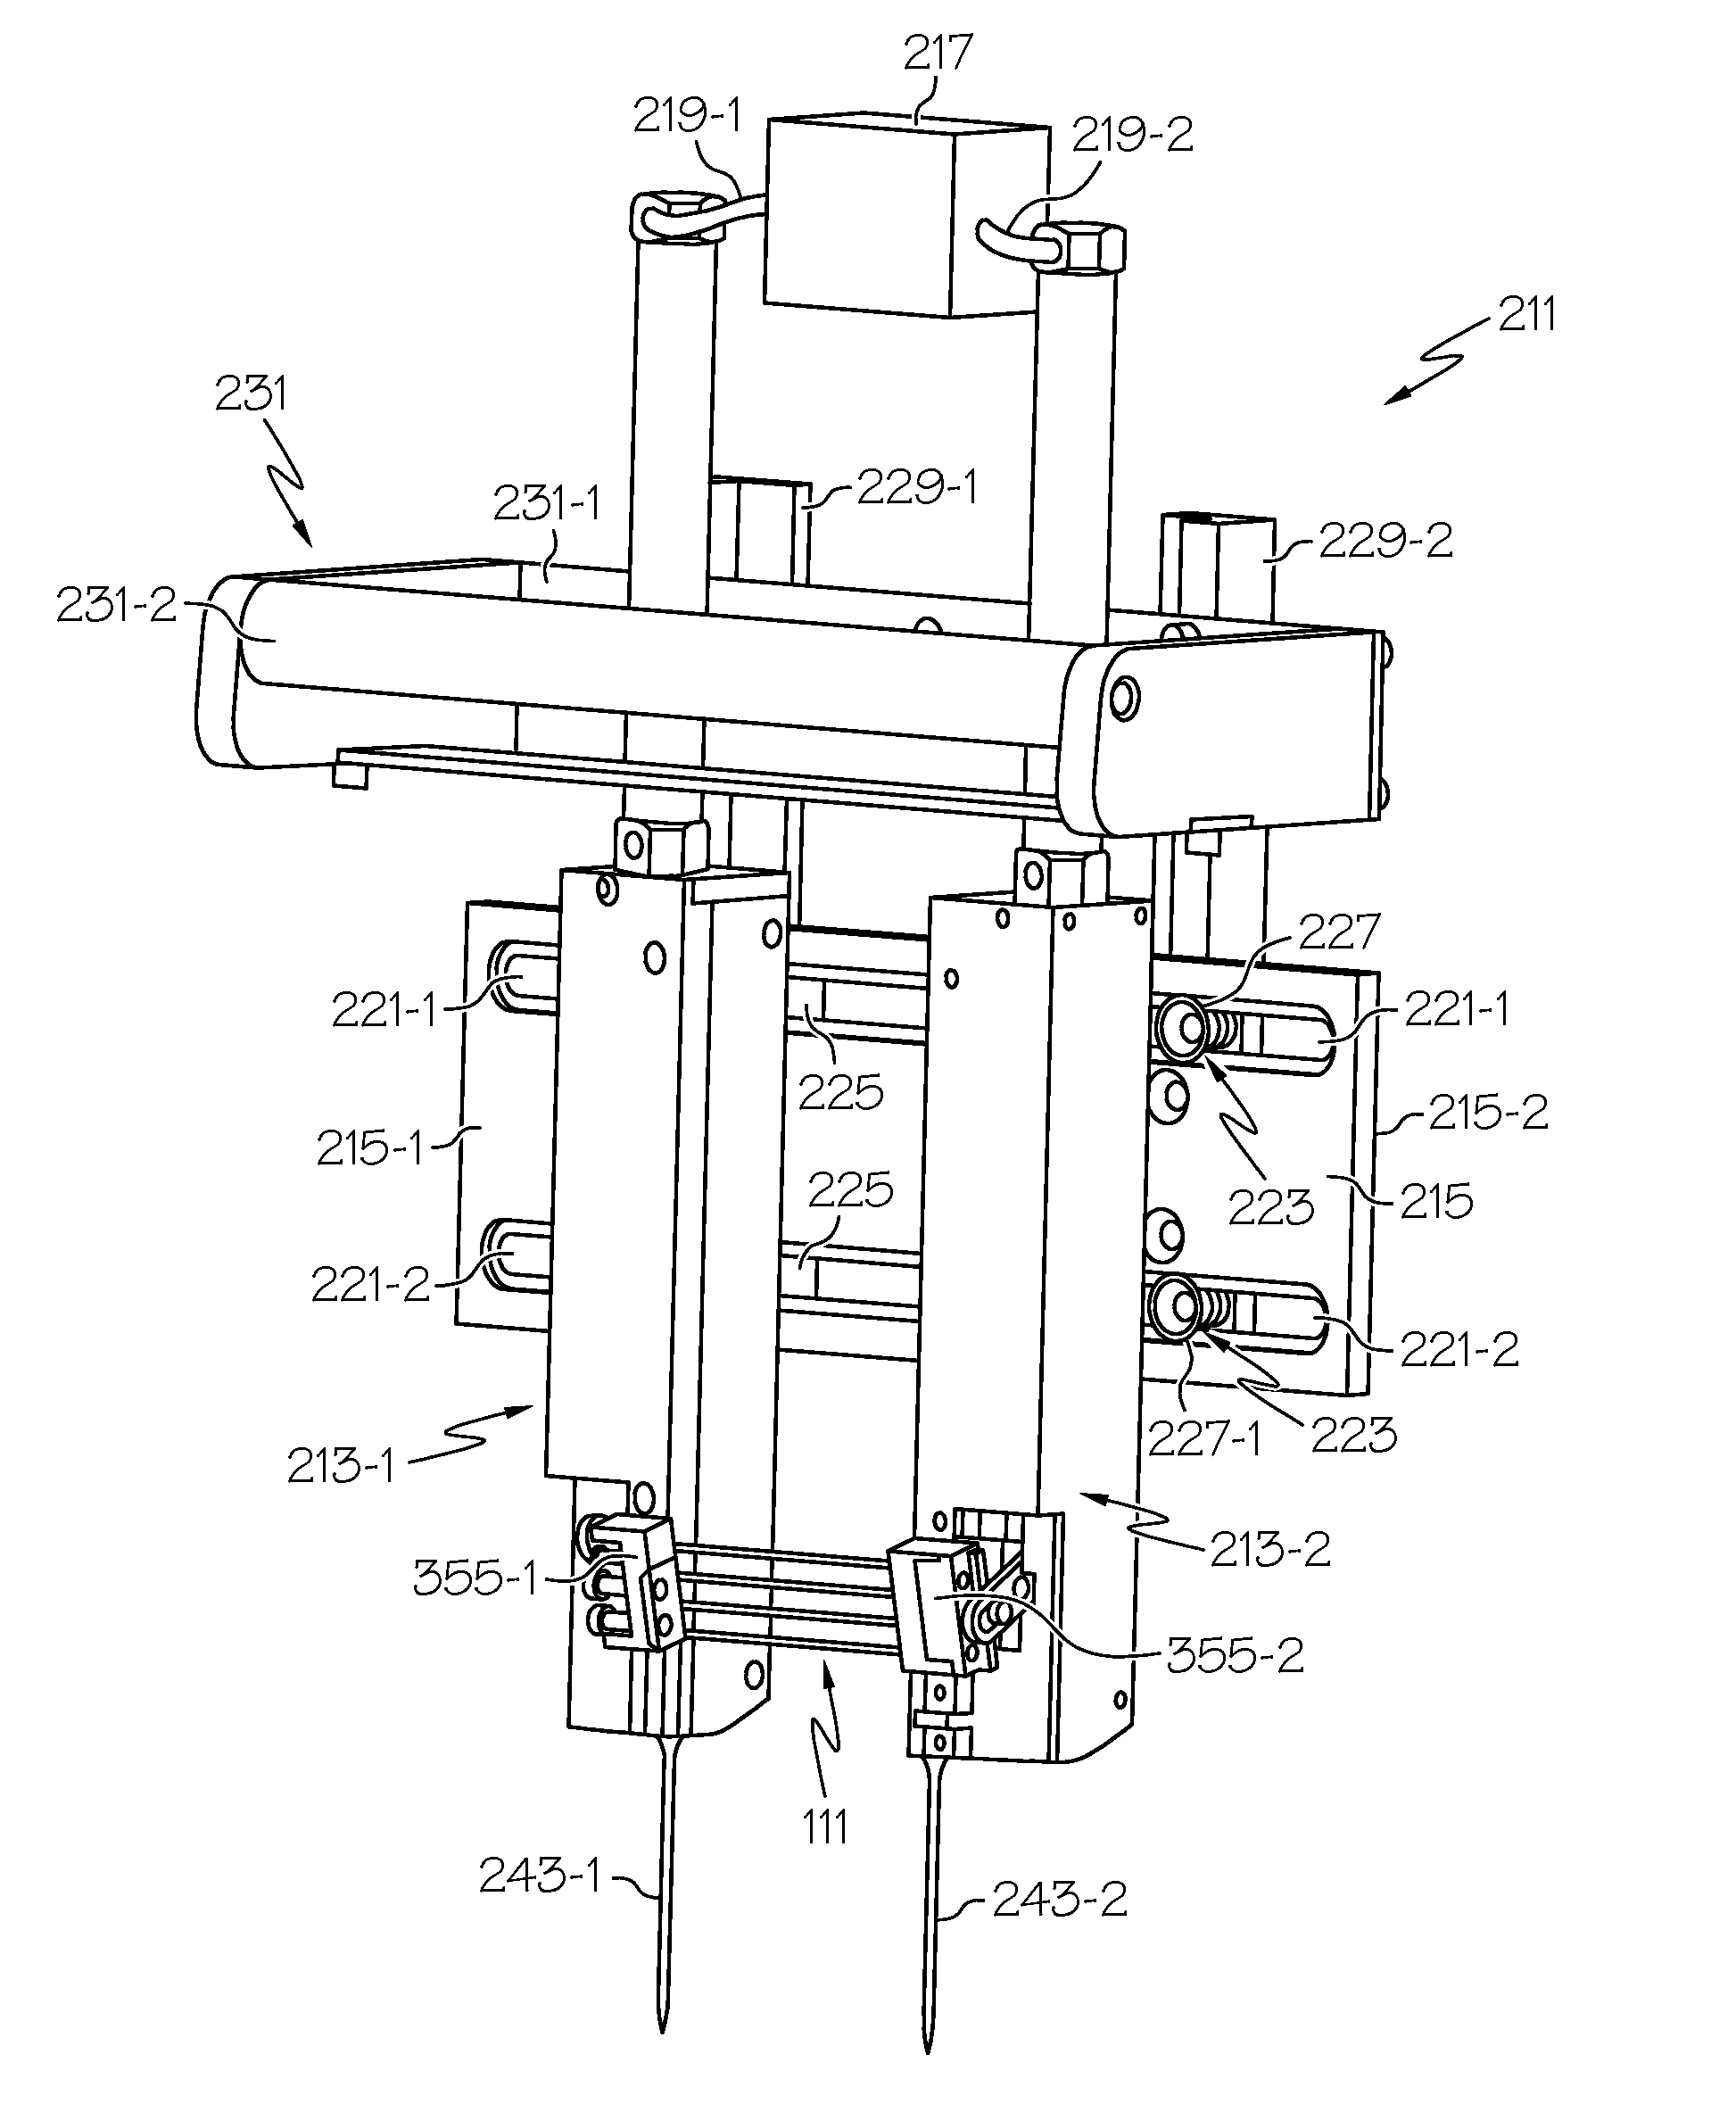 Fastener stock and device for use in dispensing plastic fasteners therefrom